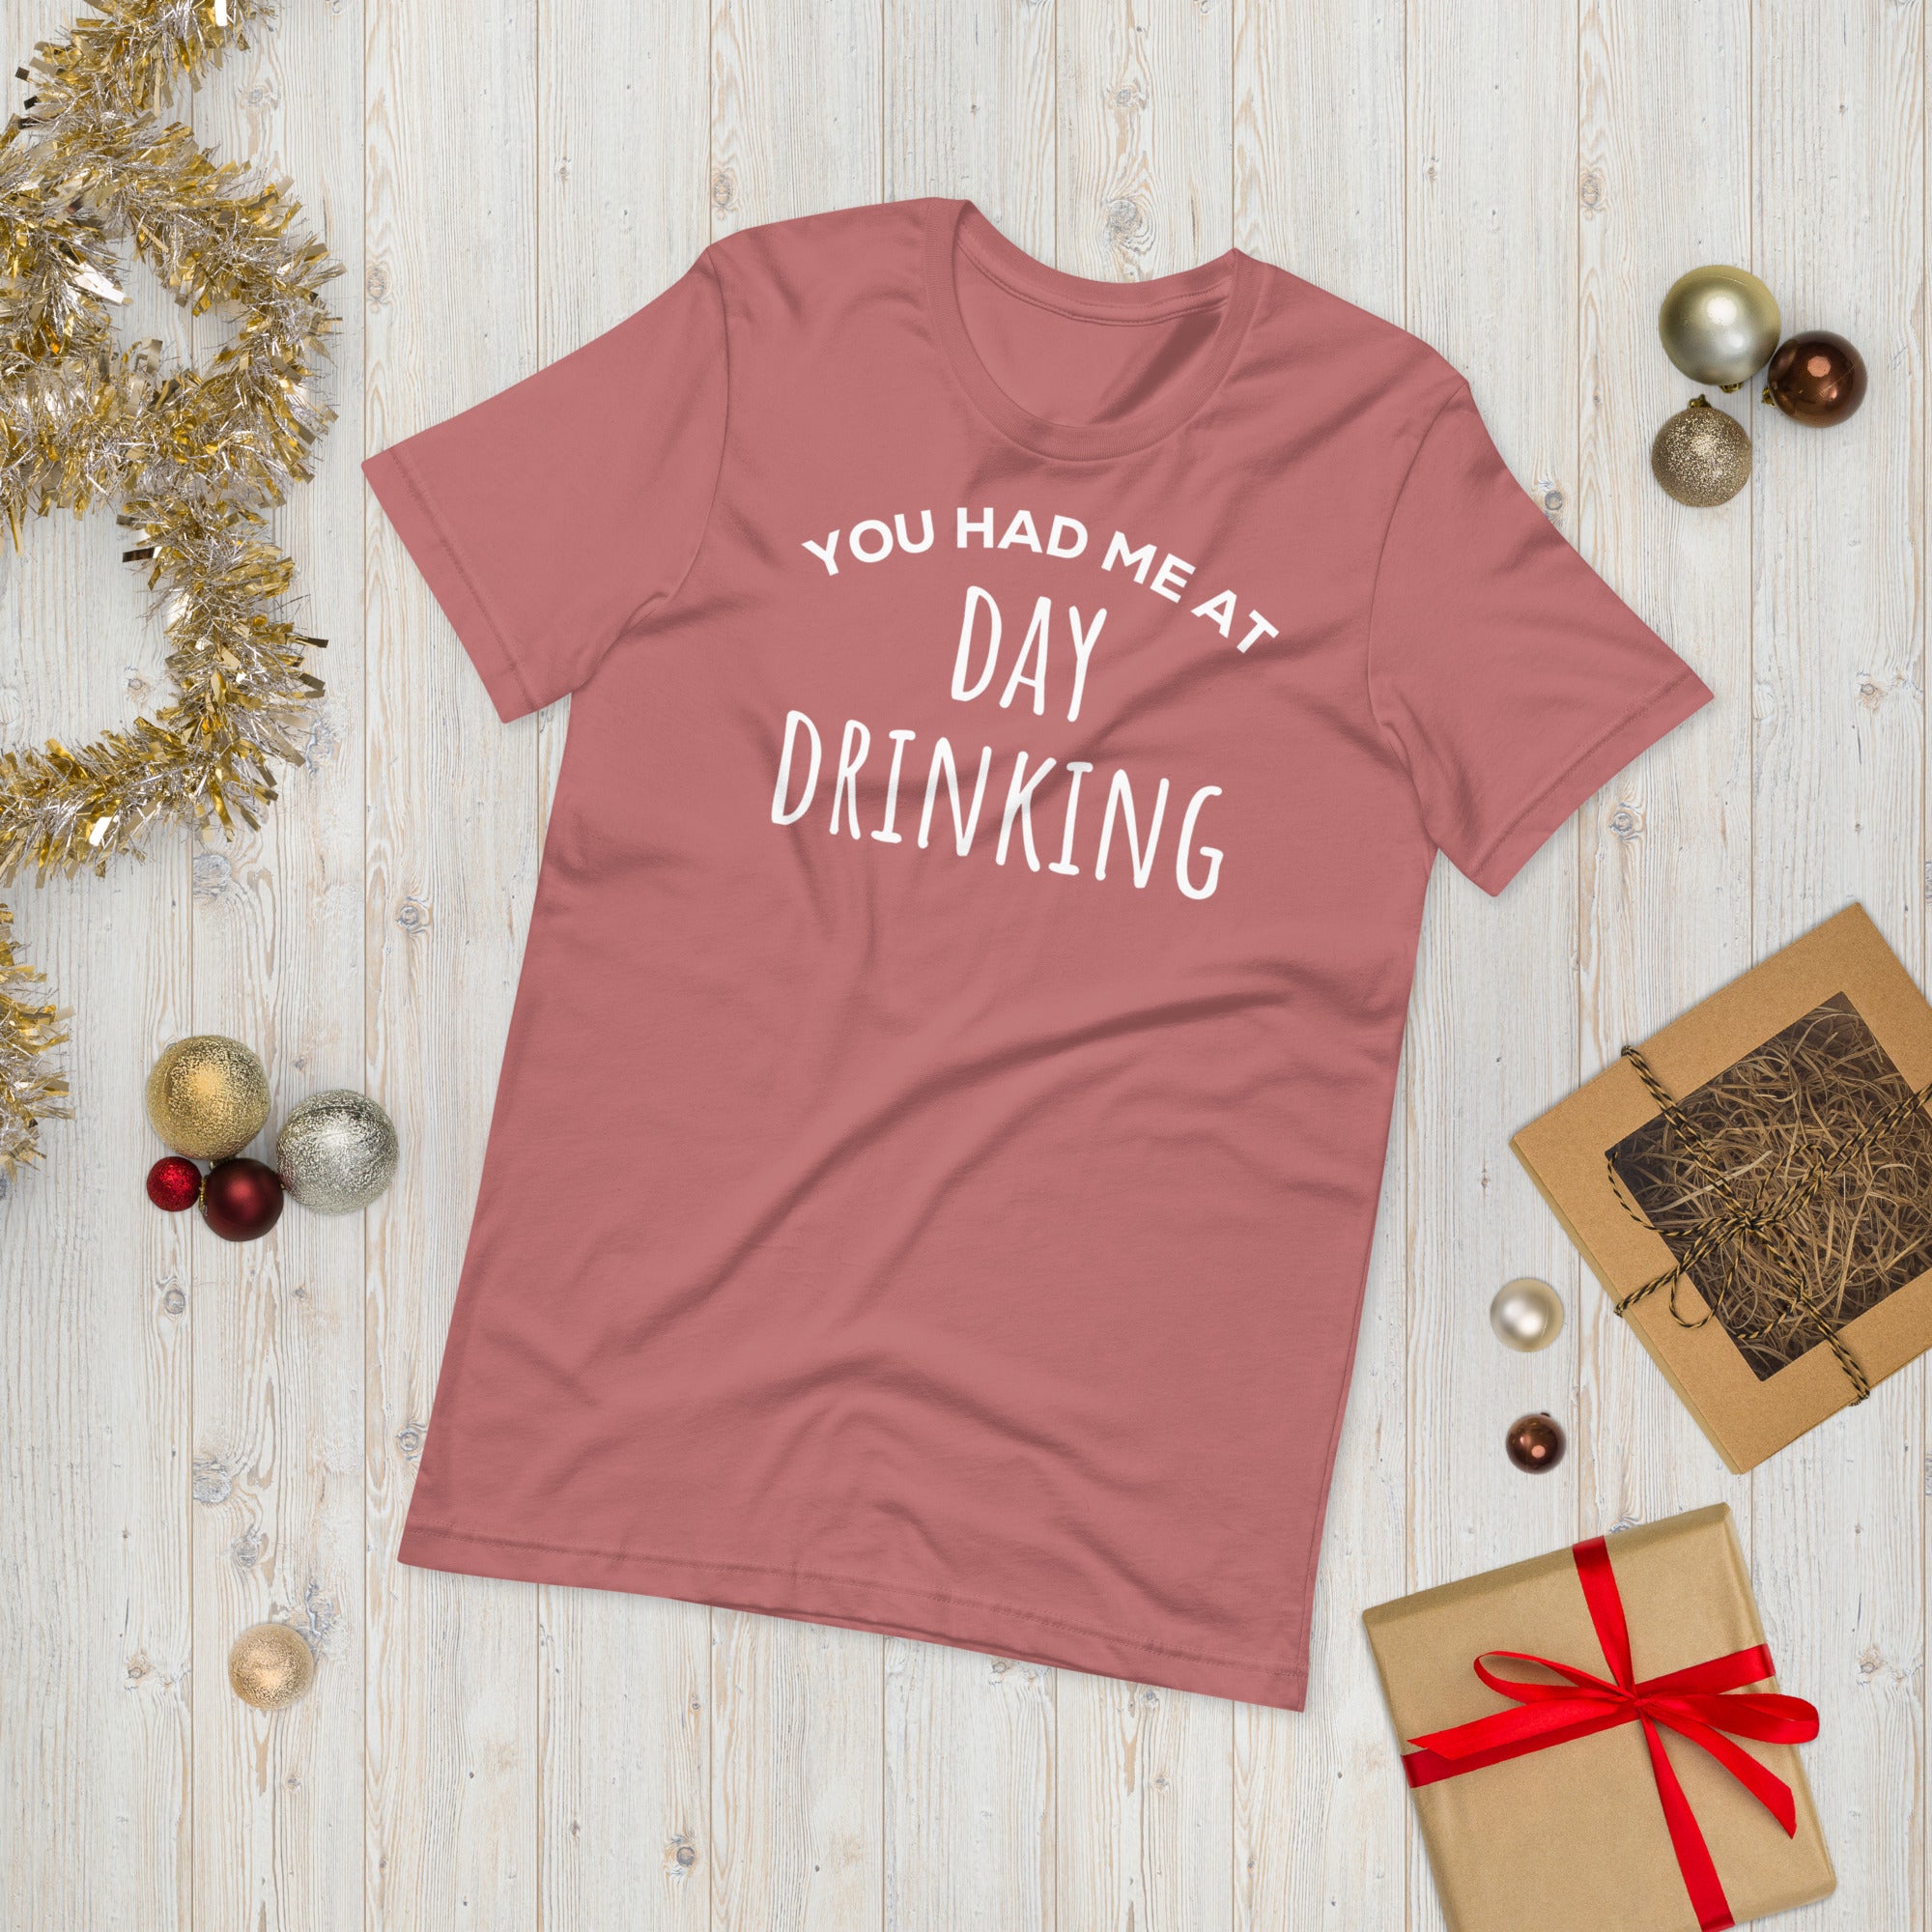 You Had Me At Day Drinking Shirt, Funny Day Drinker Shirt, Day Drinking Shirt, Drinking Shirt, Funny Drinking Shirt, Drinking Team Gifts - Madeinsea©